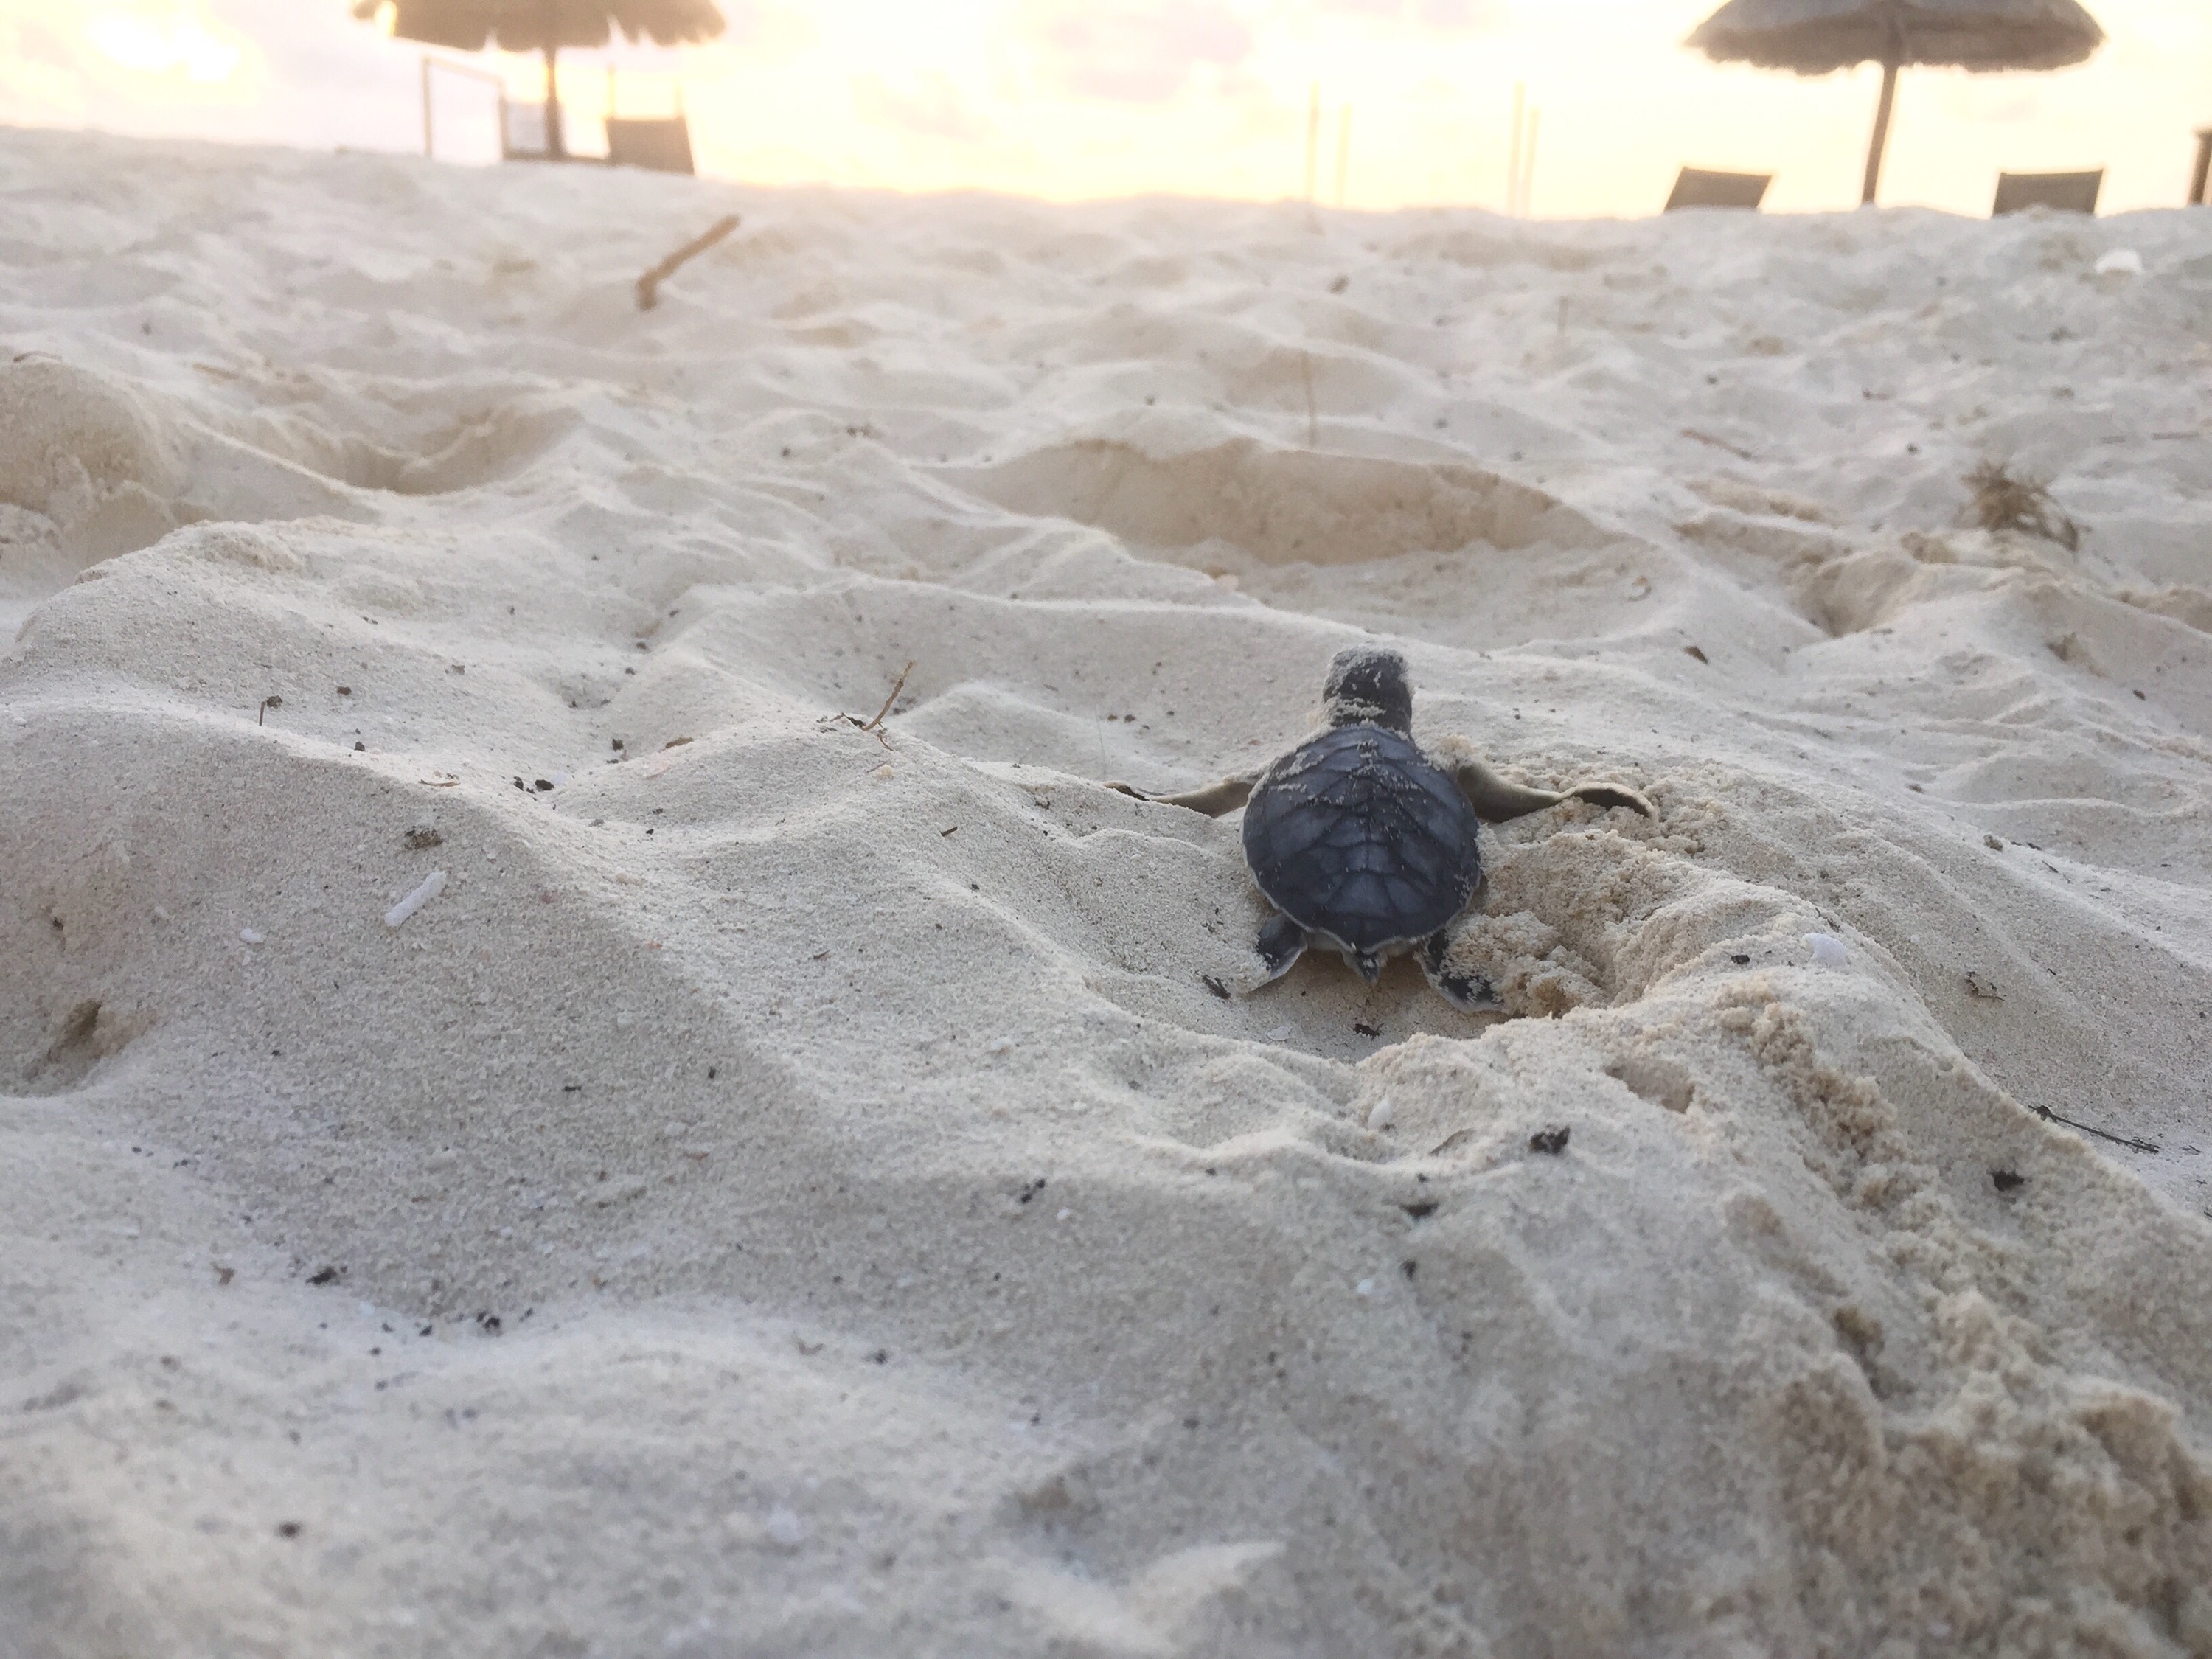 Newly hatched sea turtle heading to the ocean on the beach in Cancun , Mexico Photo copyright Valerie Duty Citrano www.PieLadtLife.com